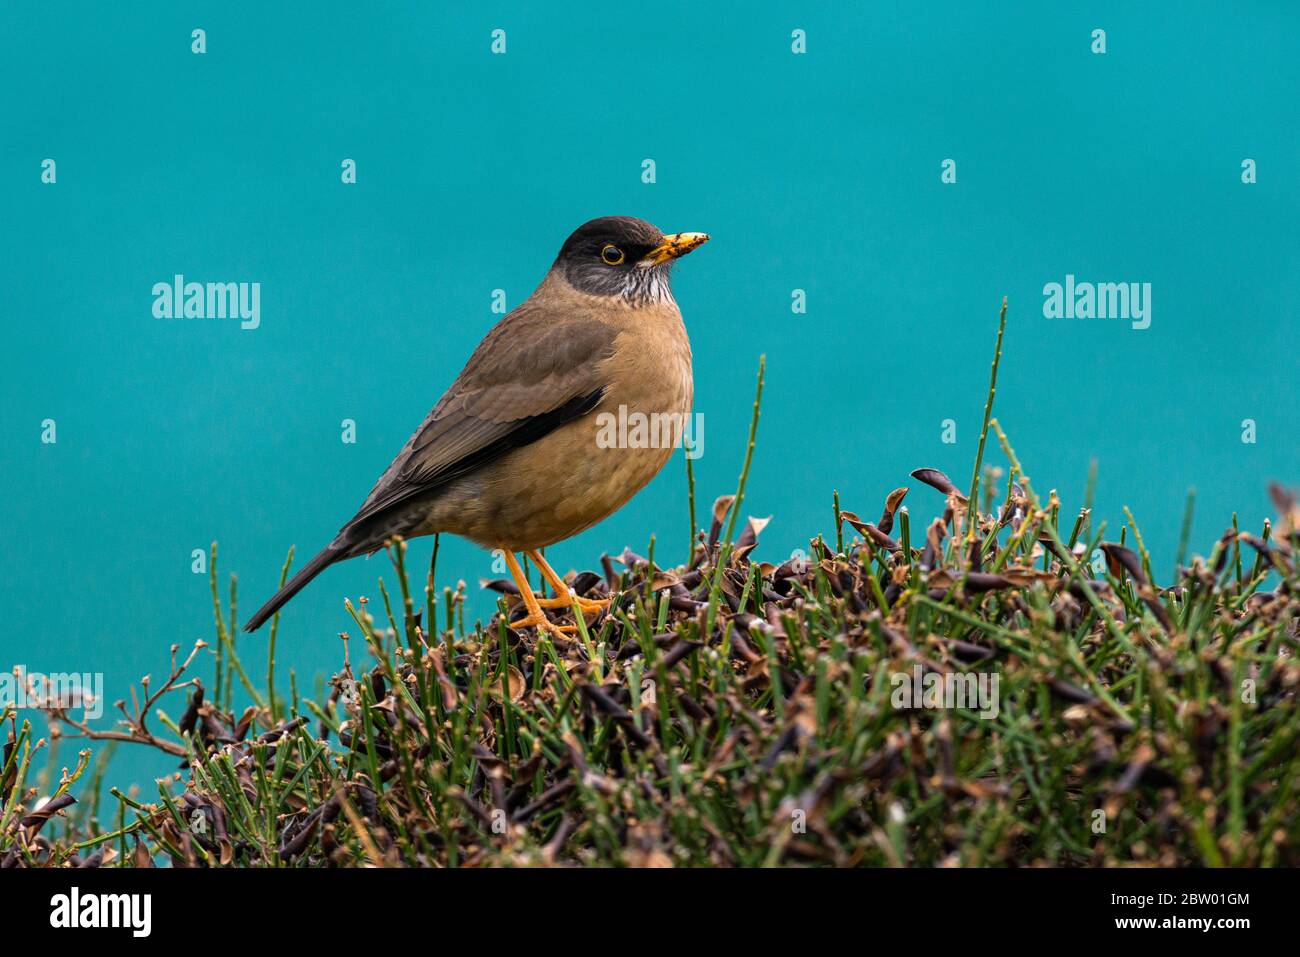 An Austral Thrush (Turdus falcklandii) from Torres del Paine, Chile. Stock Photo